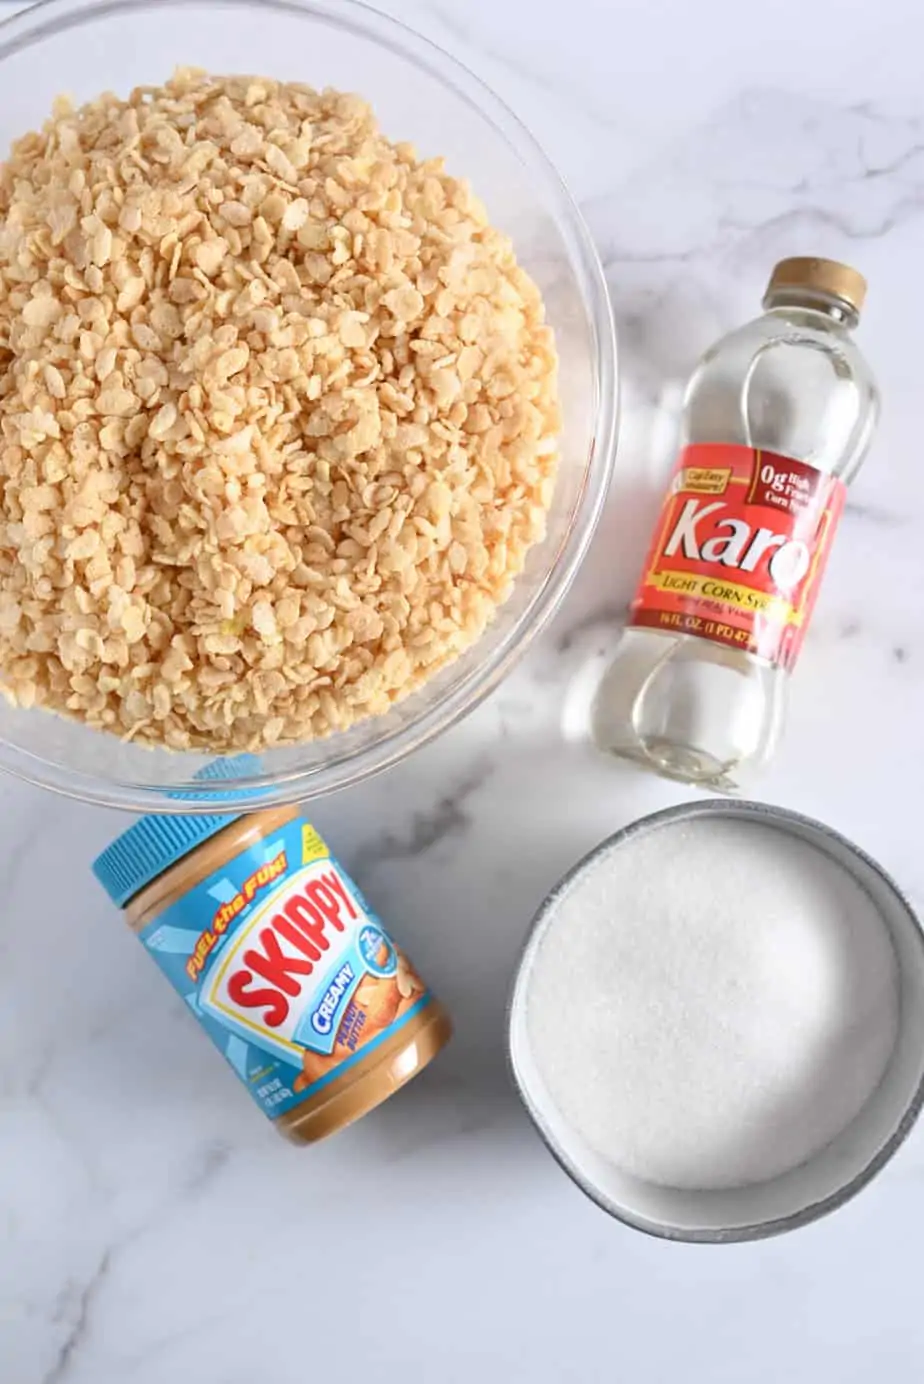 Ingredients for peanut butter rice krispie bars arranged on a marble countertop.